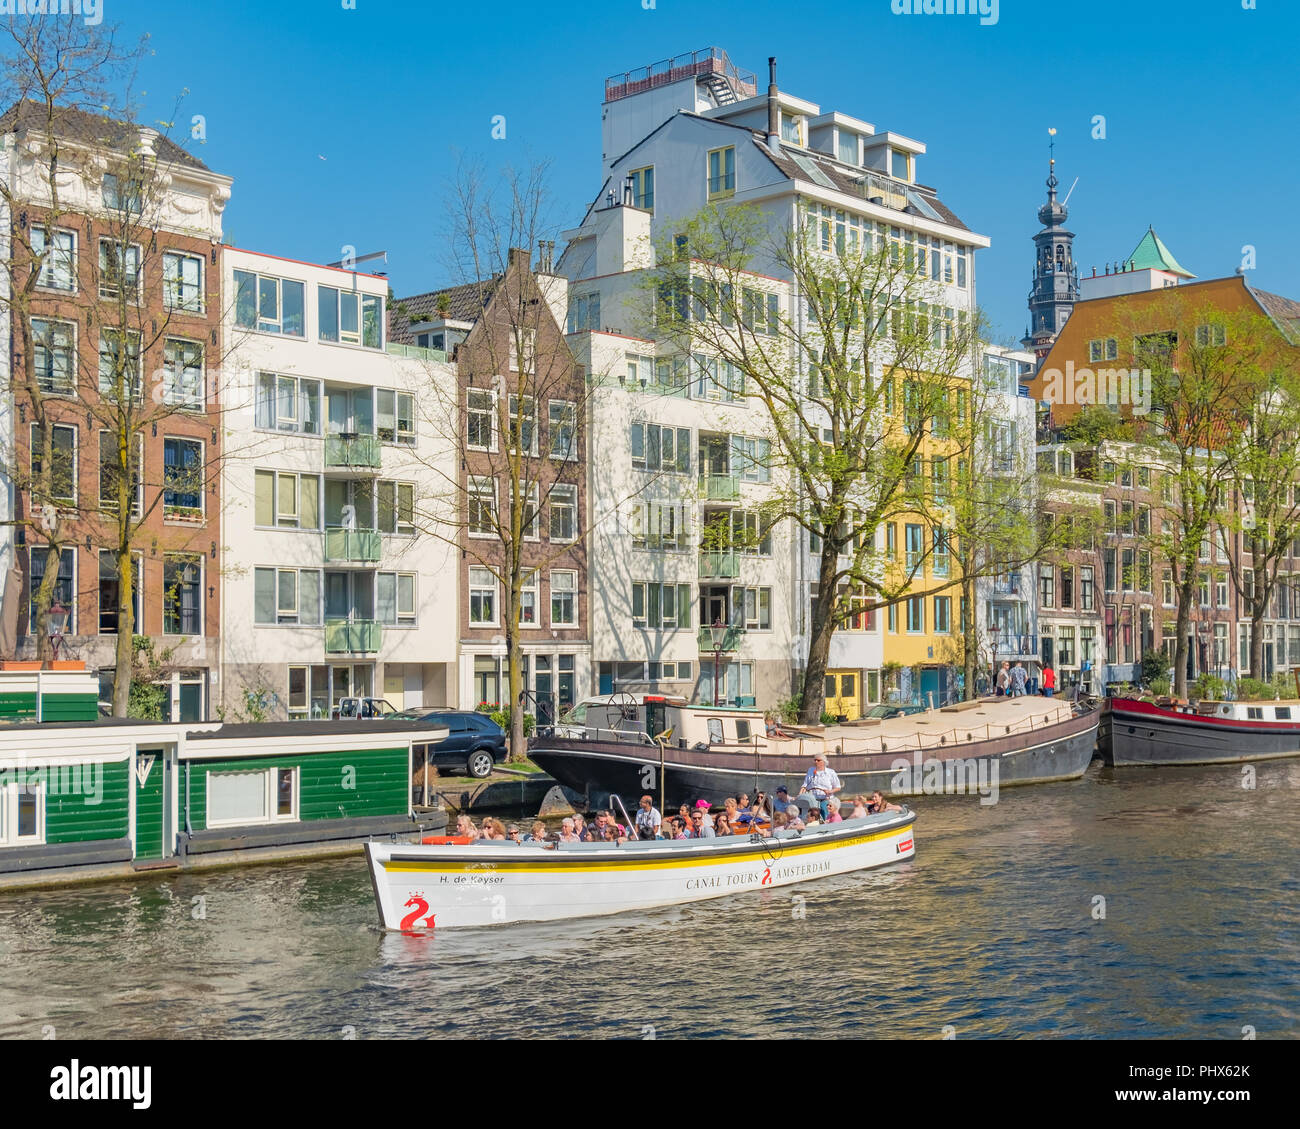 A canal tour boat glides past colourful buildings and houseboats in a canal in Amsterdam Holland. Stock Photo